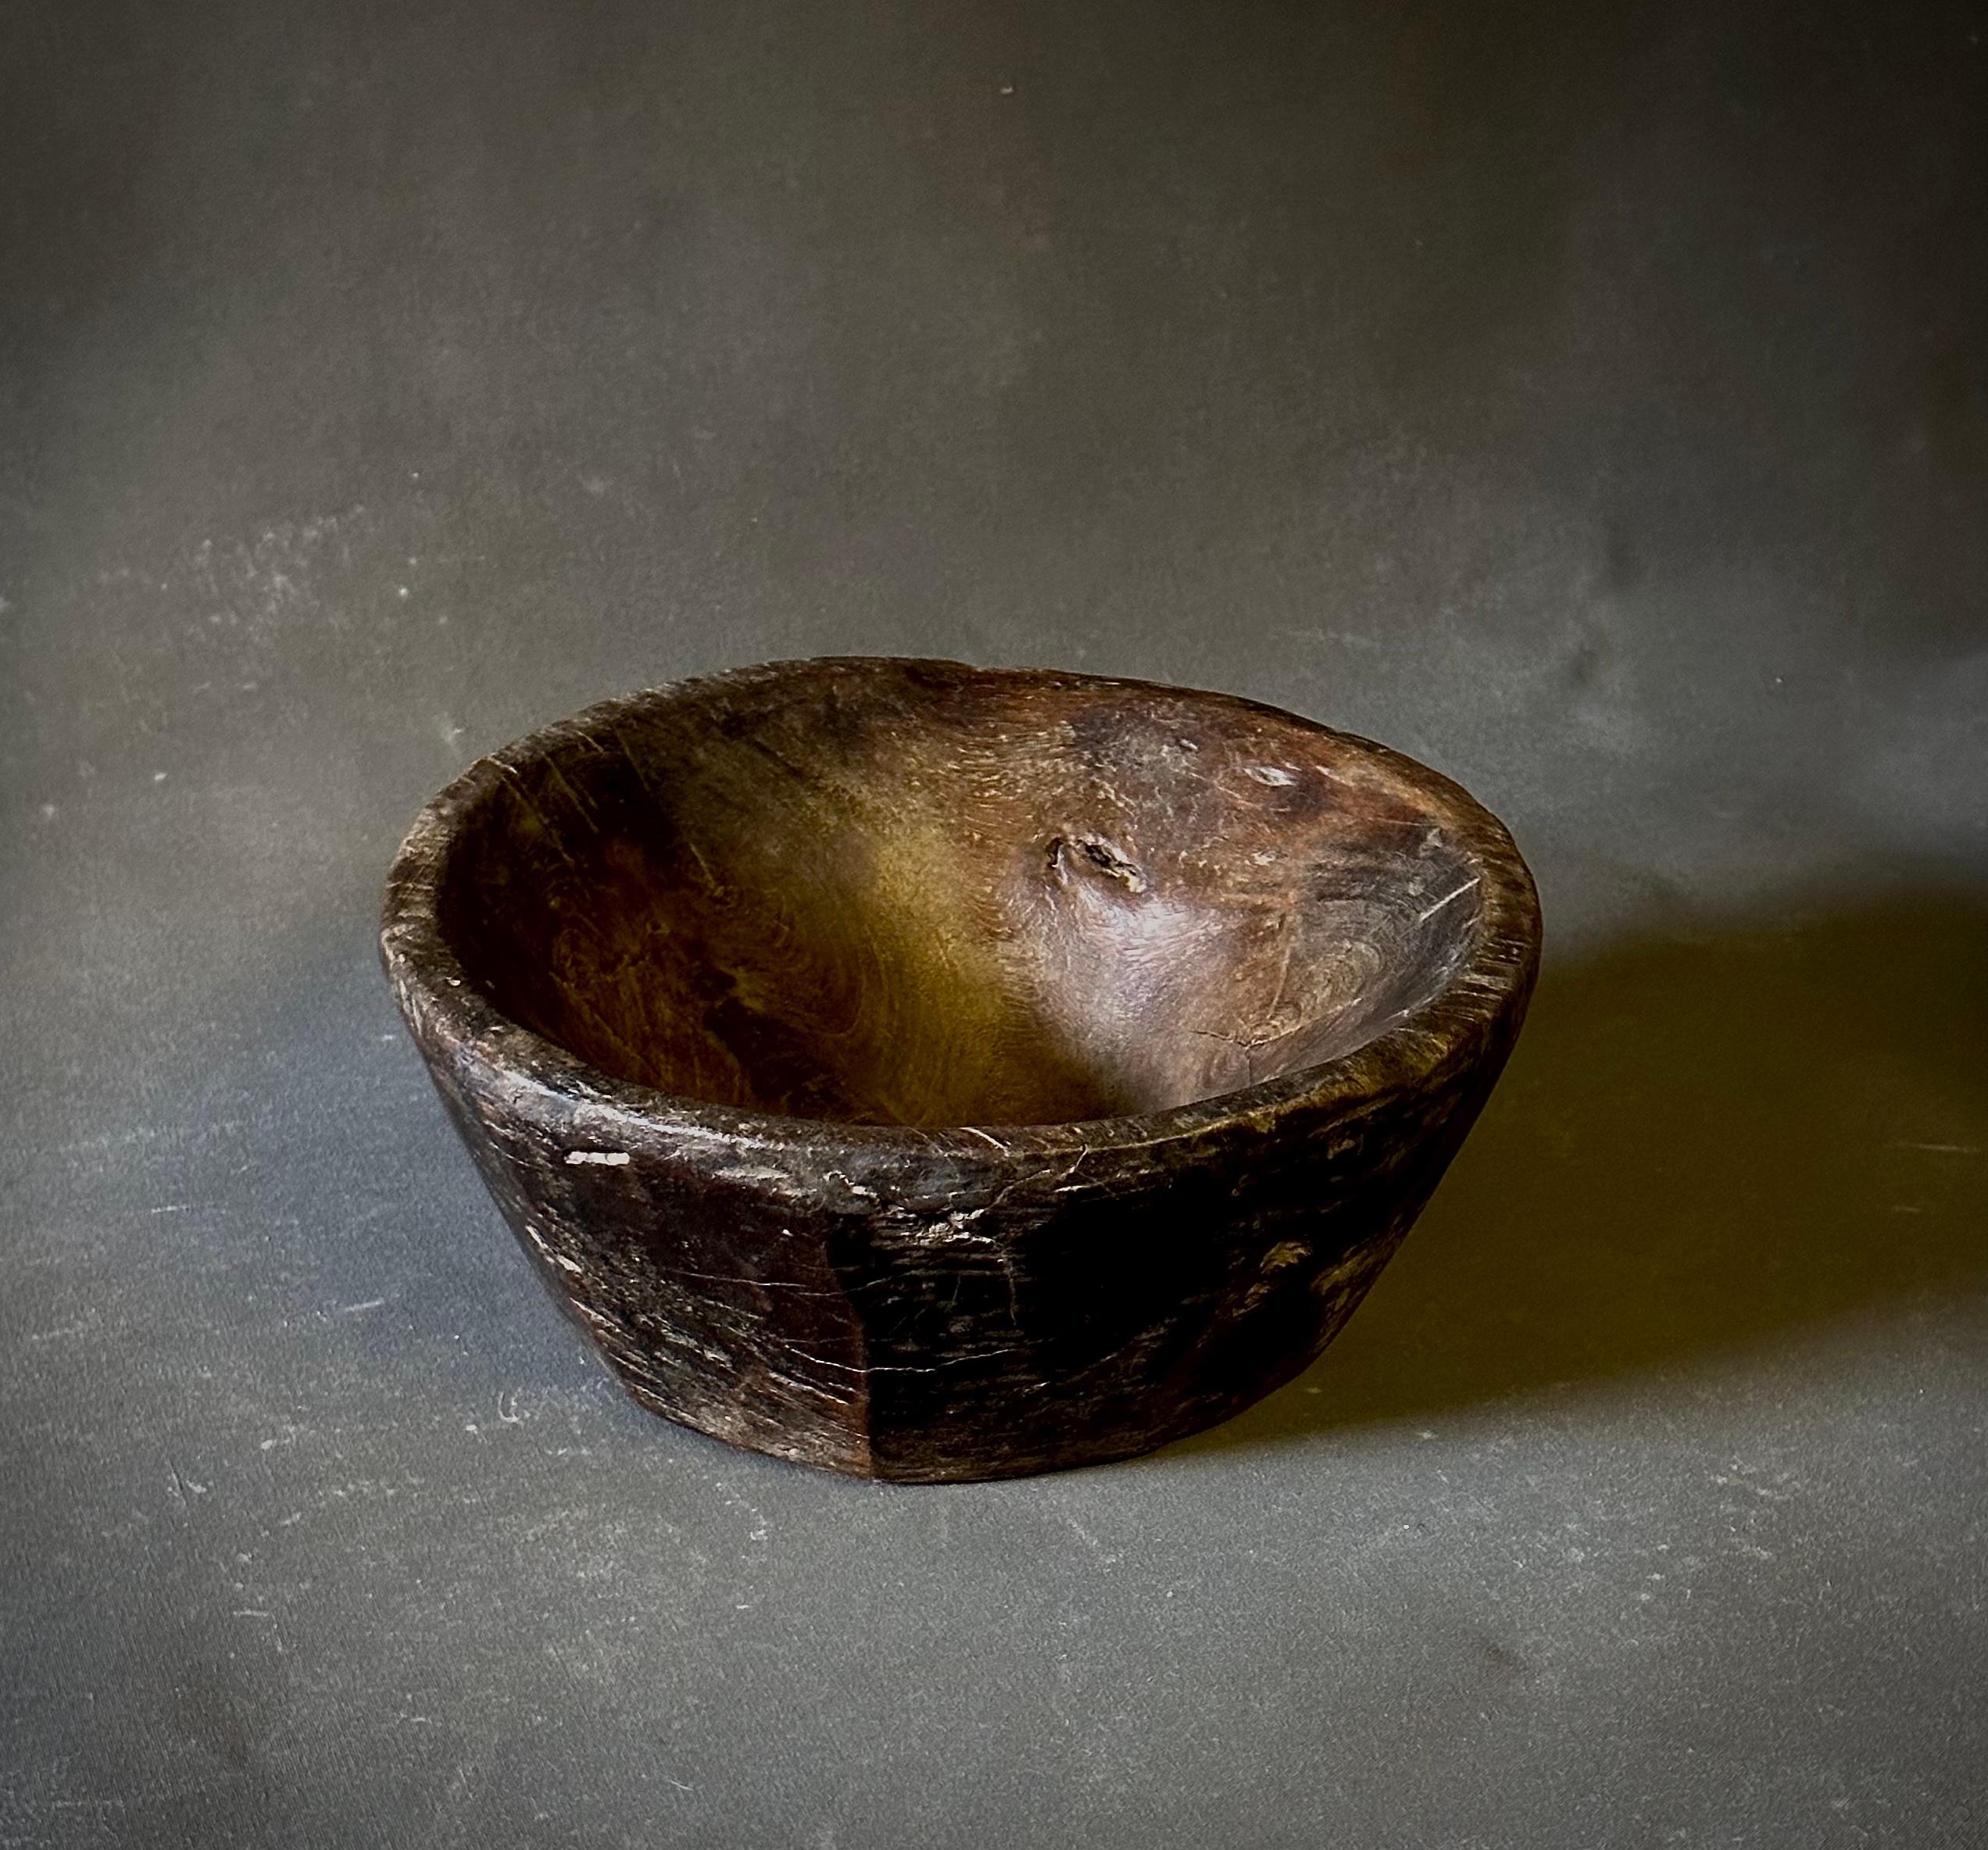 Rustic 19th century hand-carved wooden bowl. Excellent as a serving bowl or accent piece with its handsome proportions and earthen appeal. 

Belgium, circa 1860

Dimensions: 11.5 W x 11.5 D x 5 H.